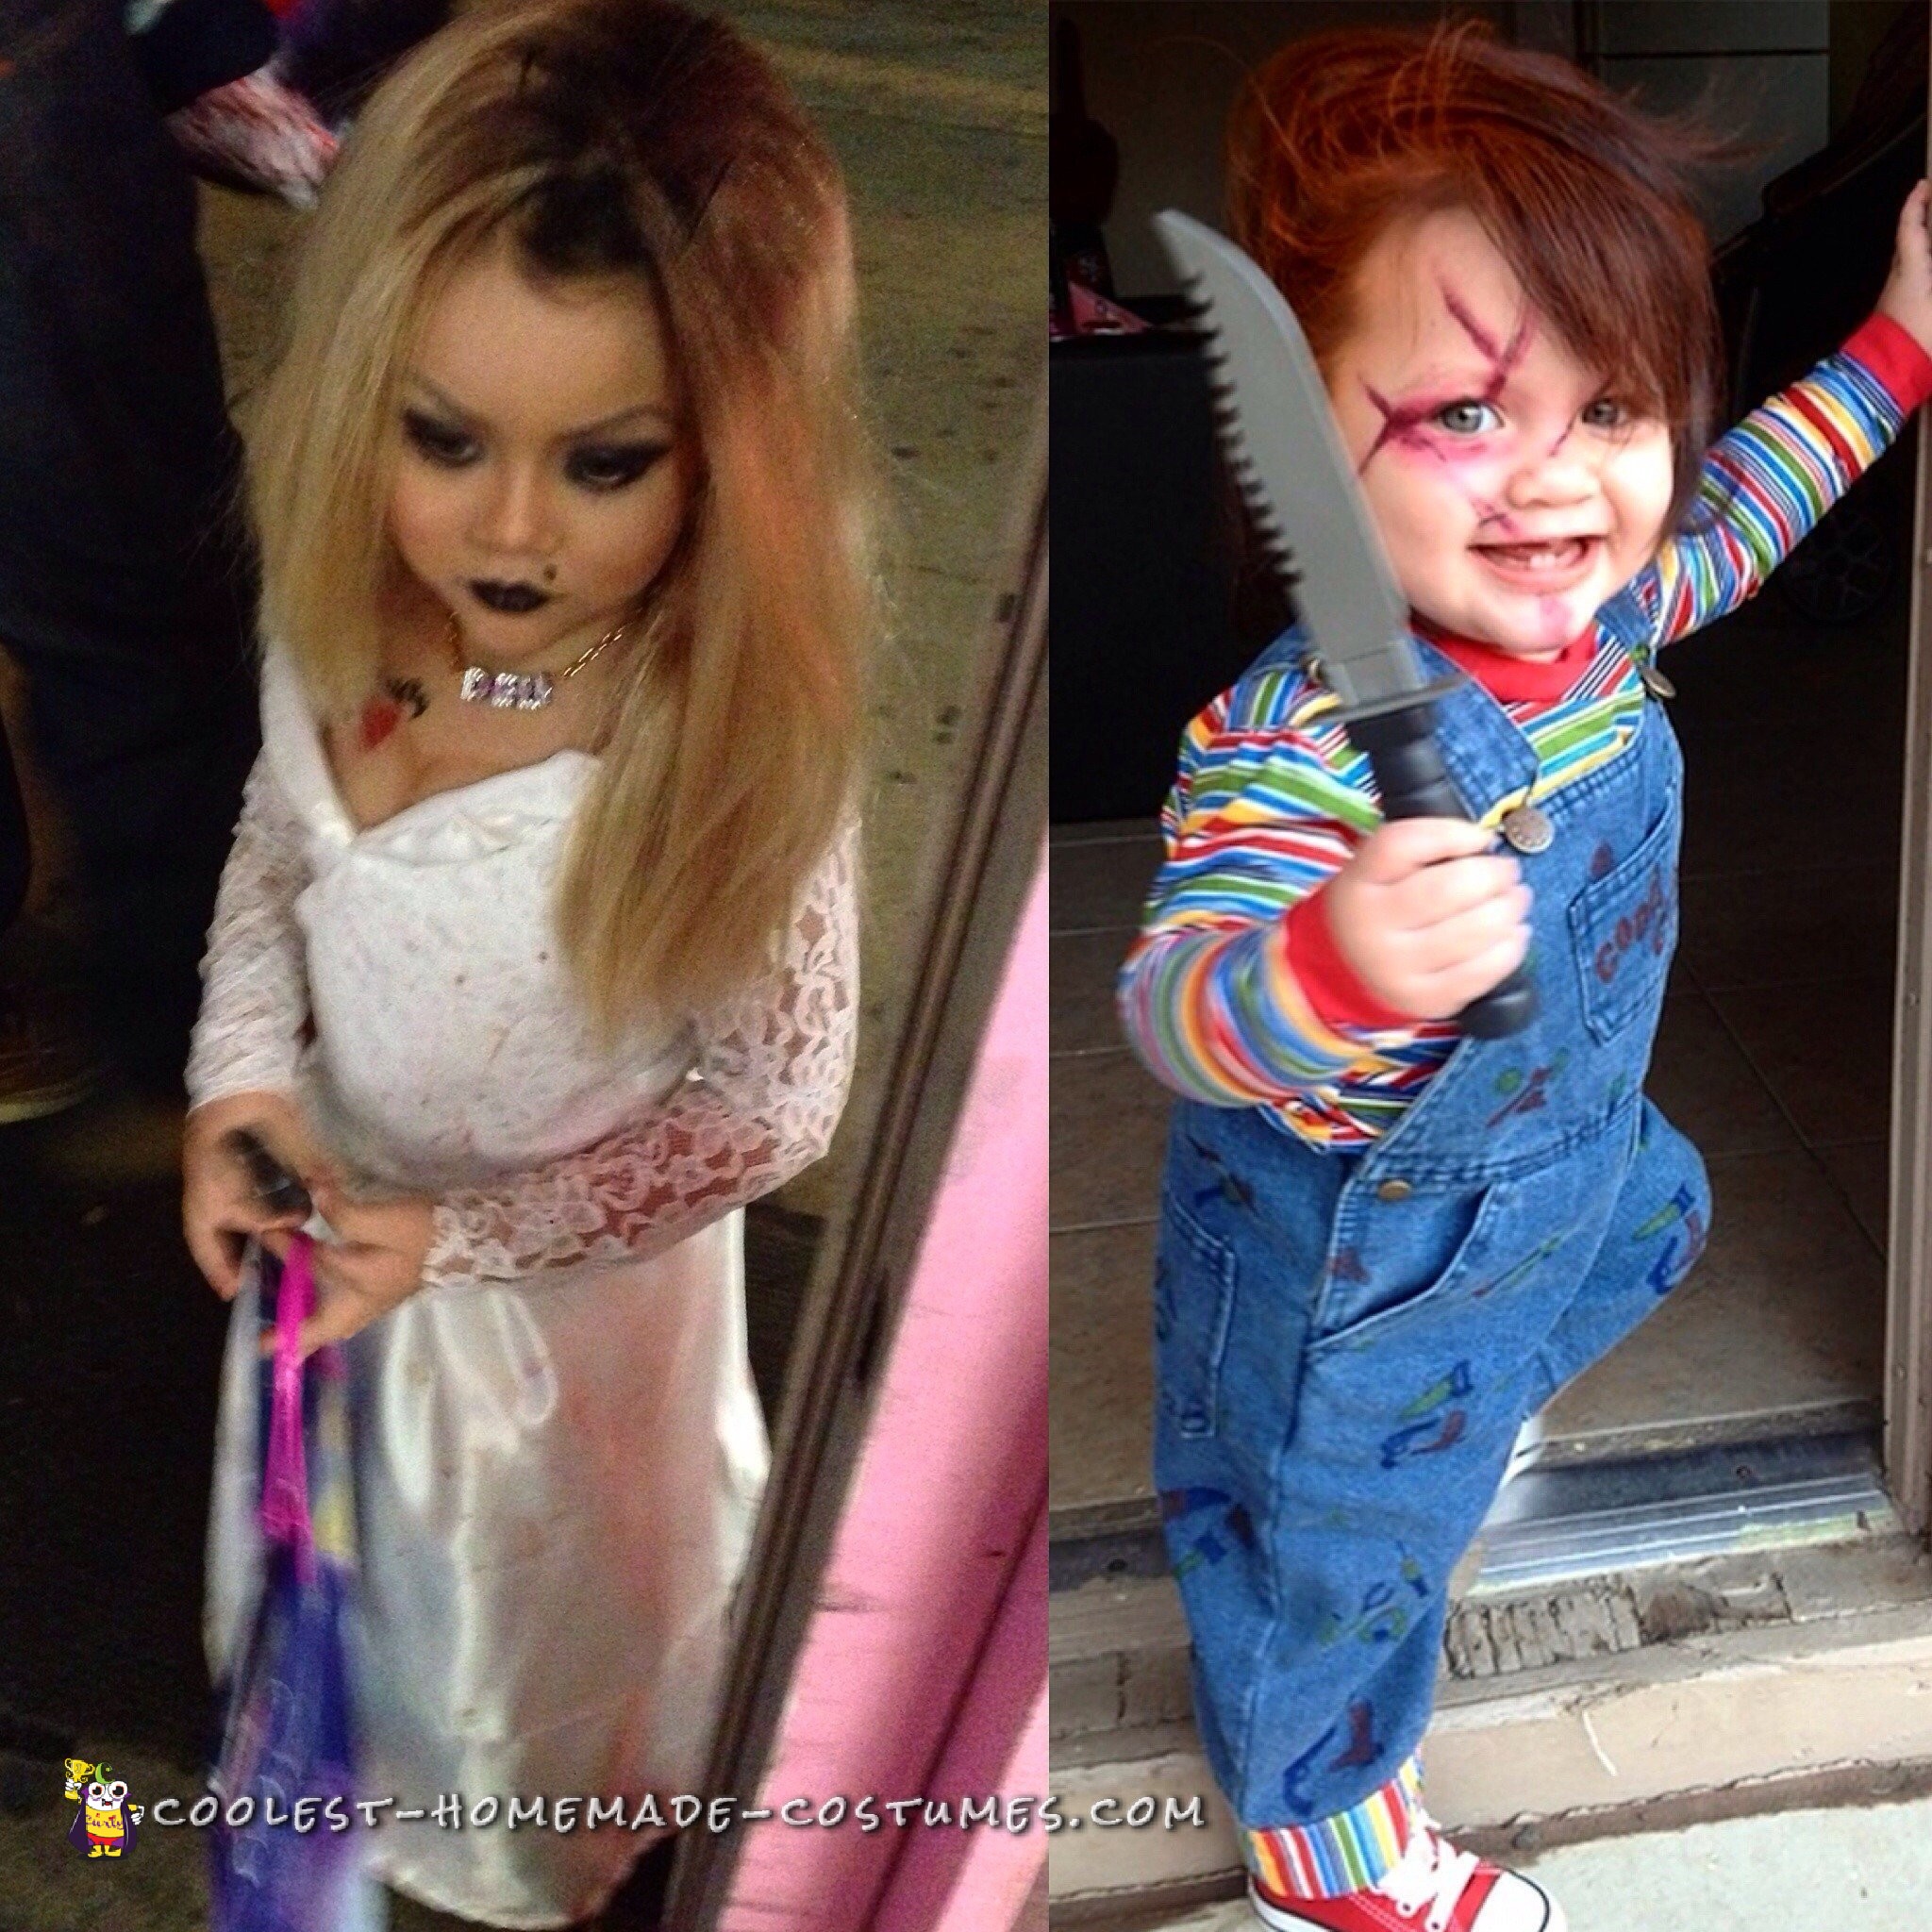 Bride of chucky halloween costume for toddlers  Chucky halloween costume,  Bride of chucky halloween, Toddler halloween costumes